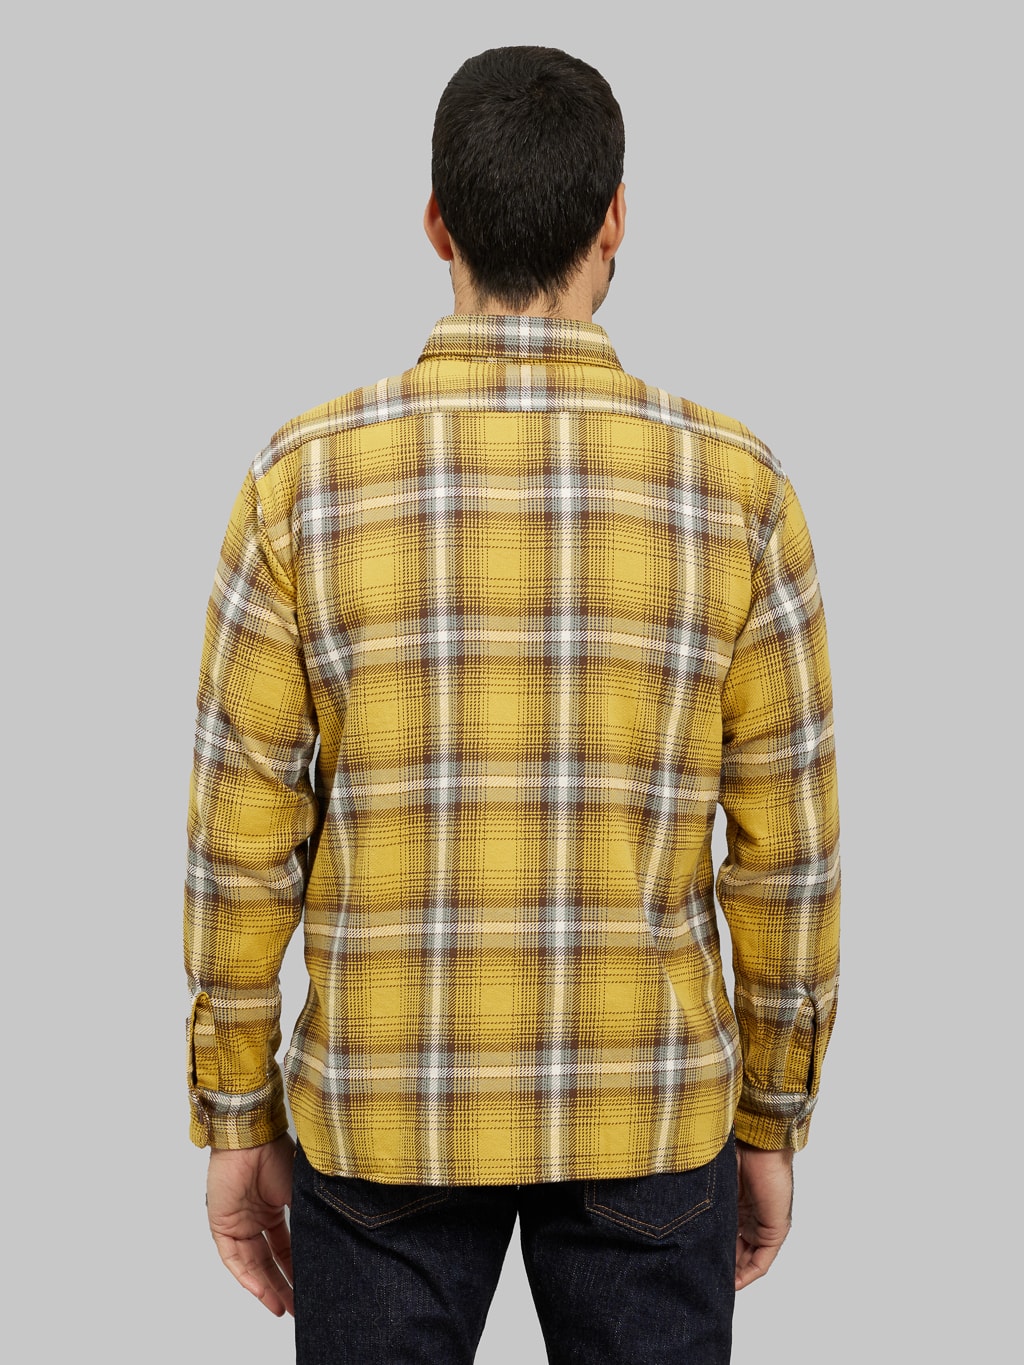 sugar cane twill check work shirt flannel yellow model back fit